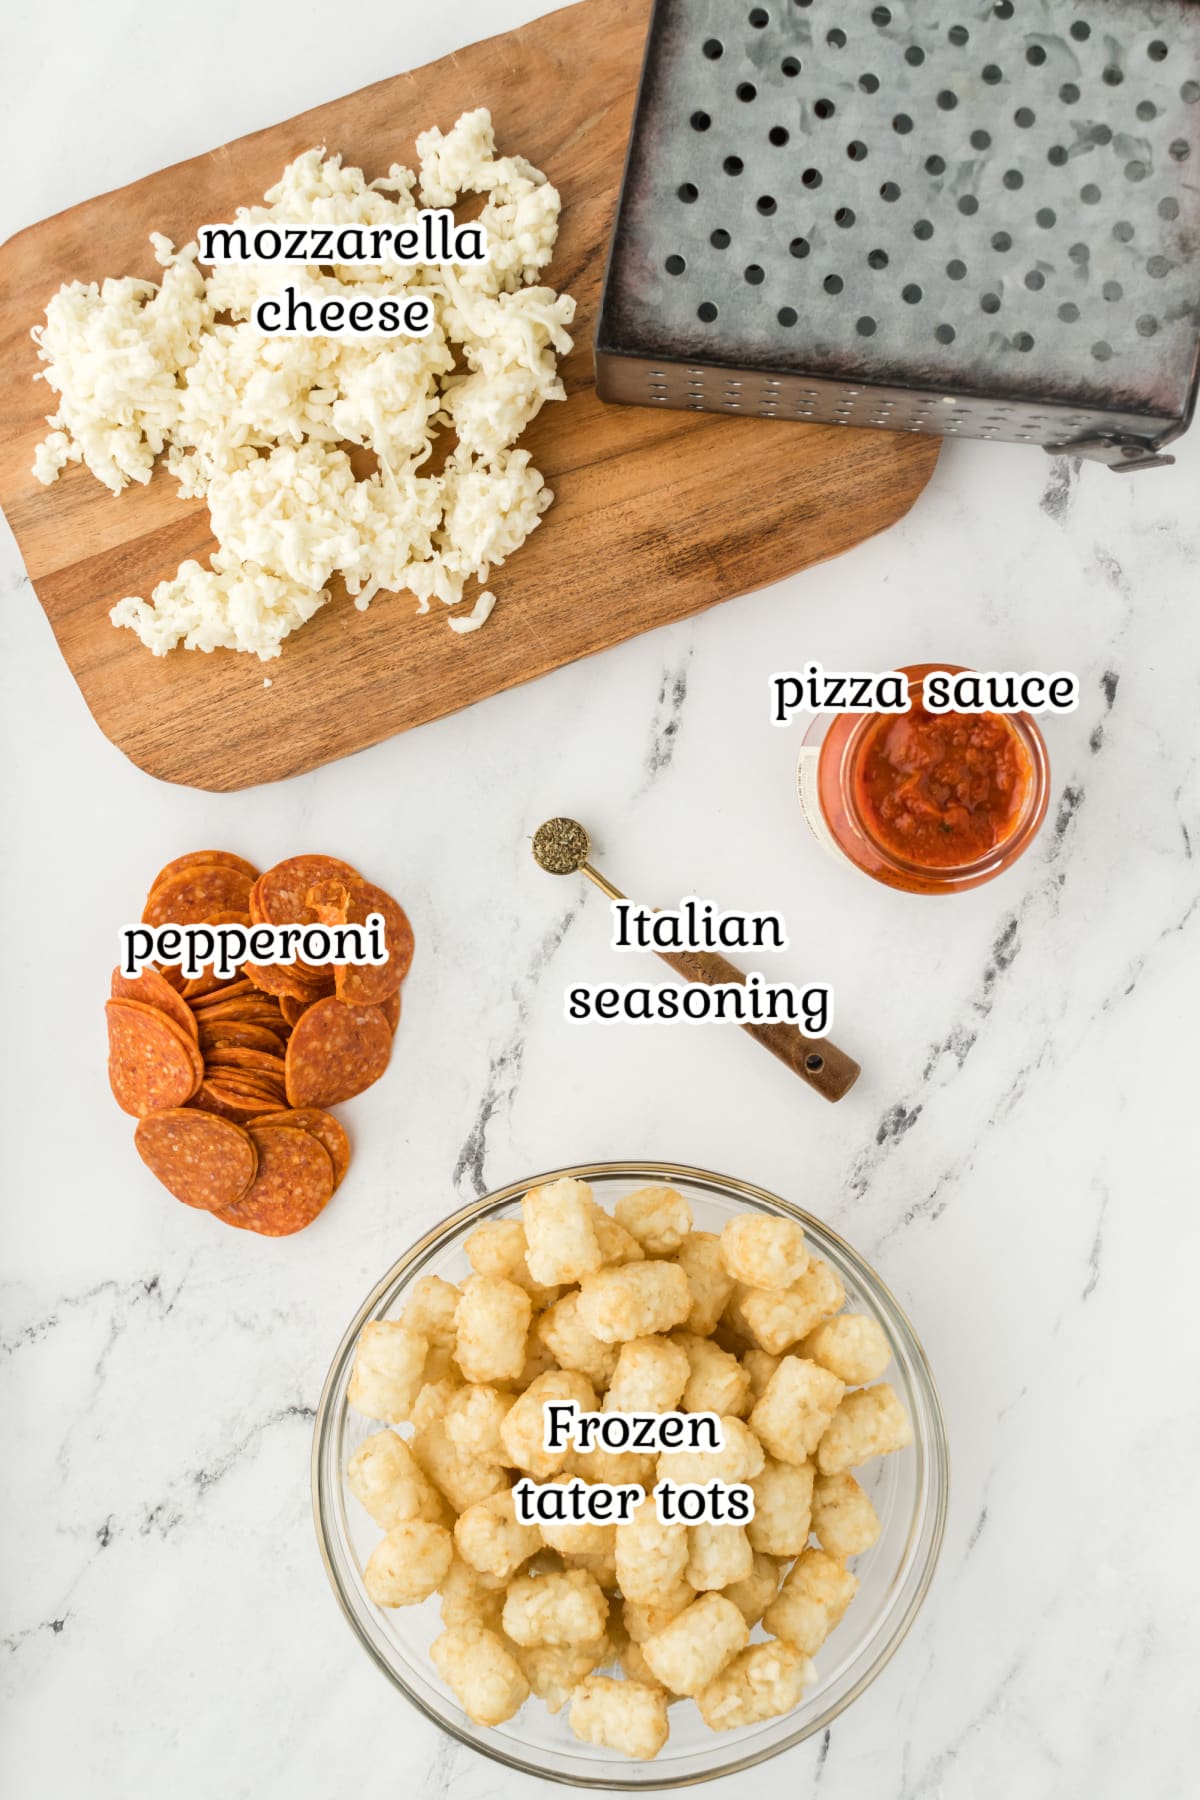 Ingredients to make recipe with text overlay.